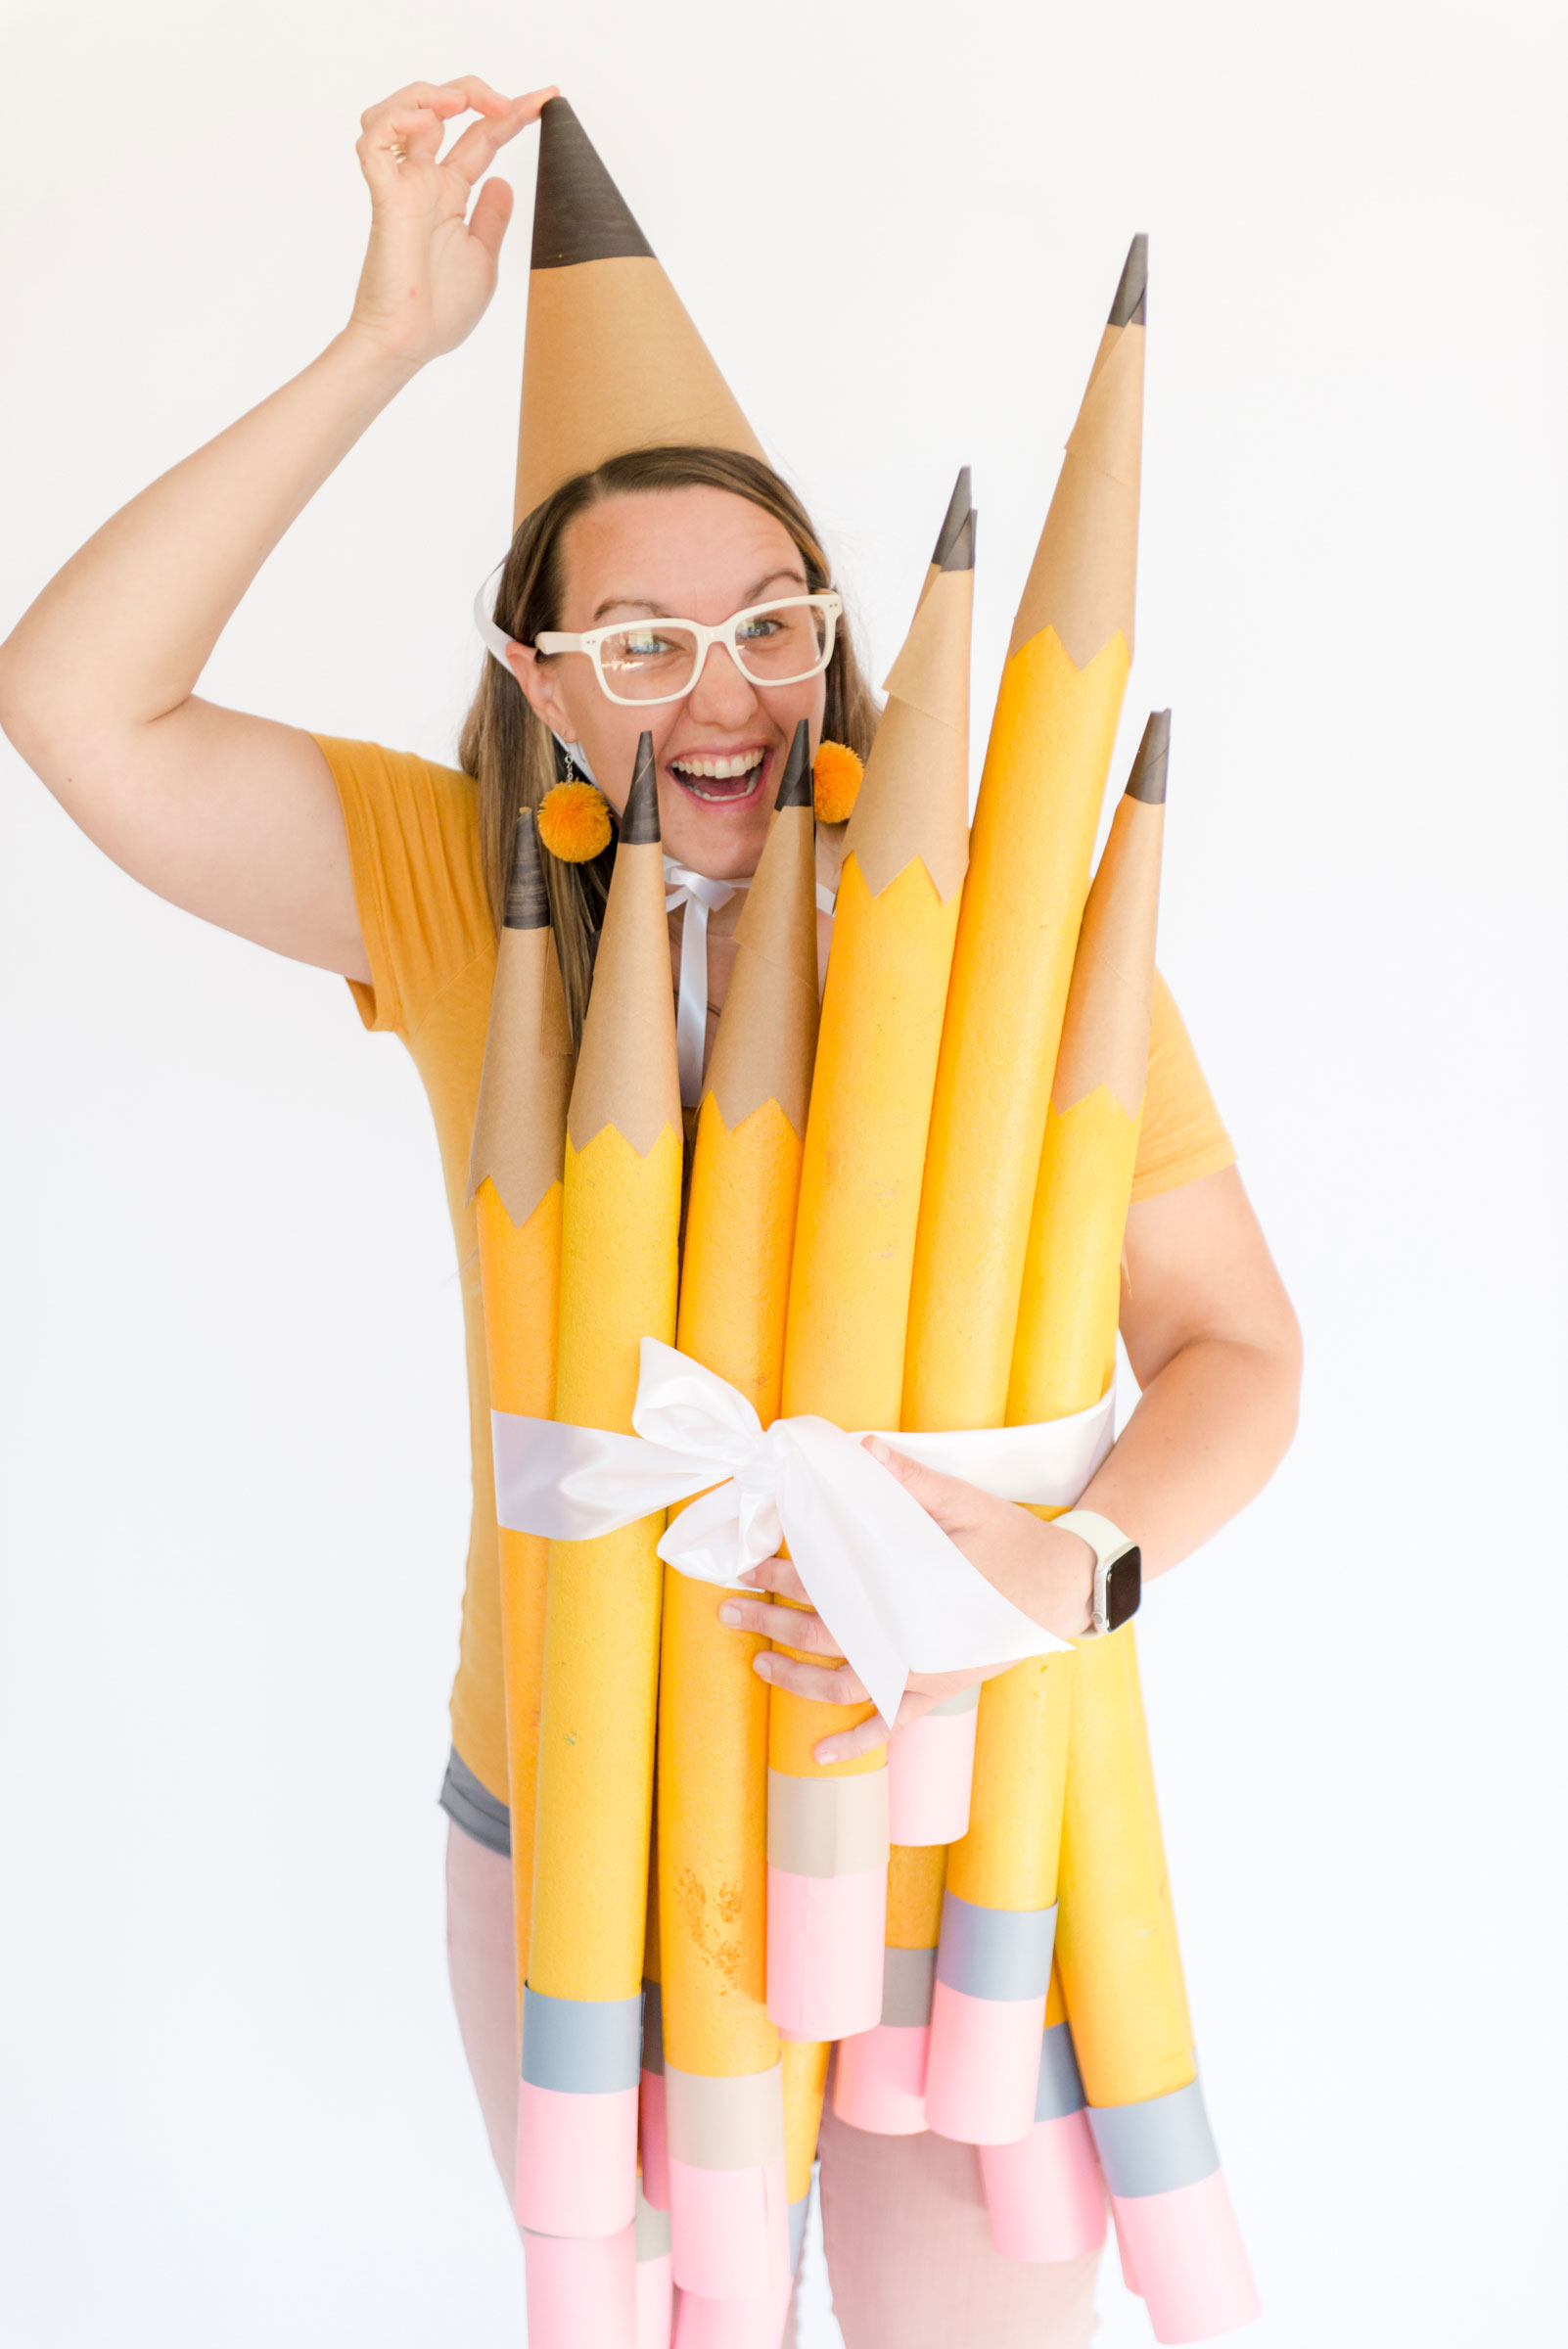 A bouquet of newly sharpened pencils costume (and how much I love “You’ve Got Mail”)